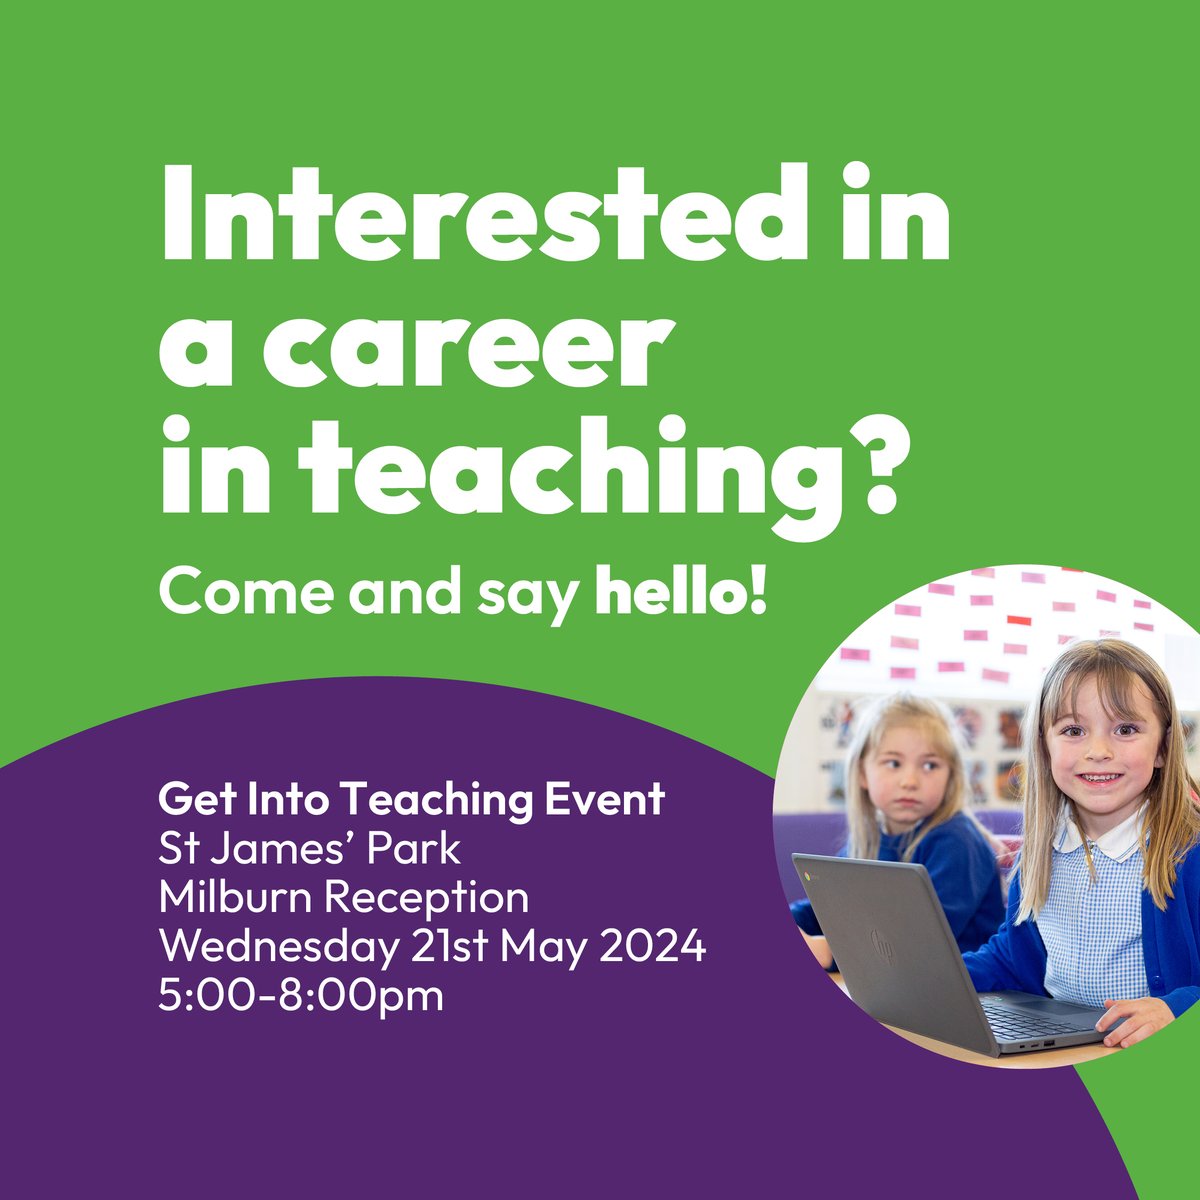 Exploring a career in teaching? We’d love to talk

Come along to the @educationgovuk Get Into Teaching event and chat to us about our school-led ITT offering.

📱 0191 7070 125

#ITT #teachertraining #getintoteaching